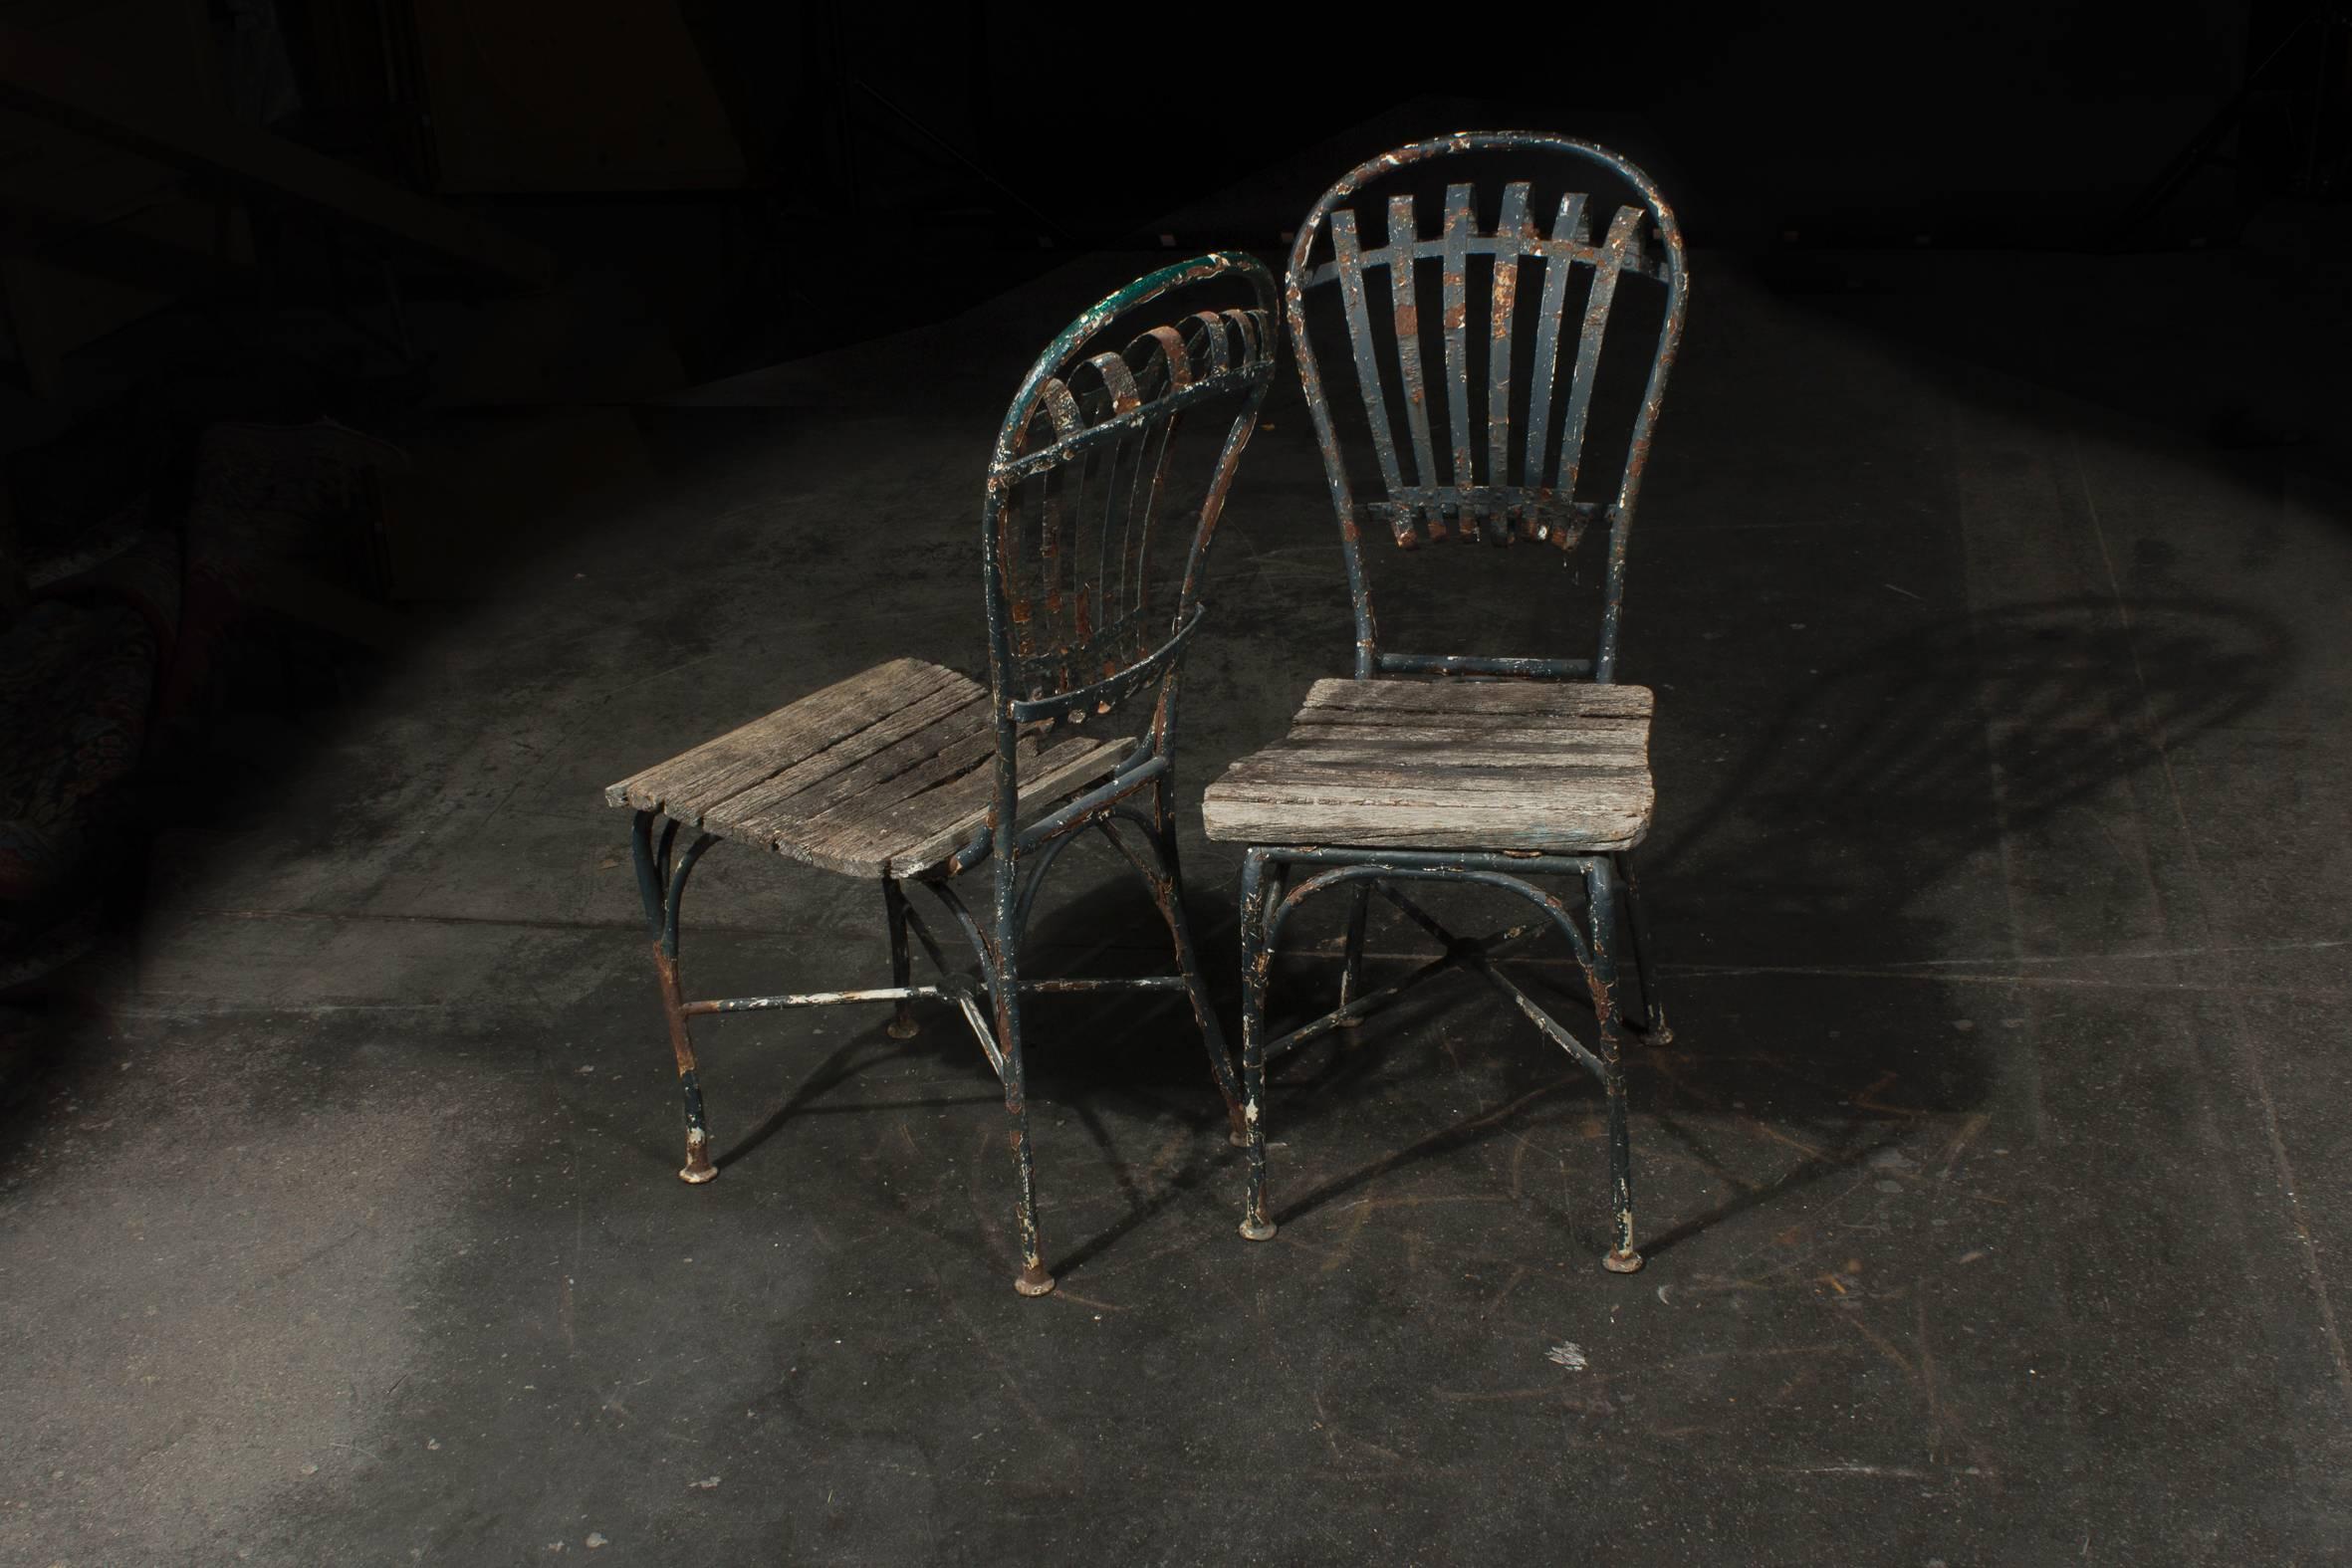 The two garden chairs can approximately be dated around 1860.
By their style an either a French or Bohemian origin seems likely. 

Made of iron and wood. 
As shown on the images in beautiful aged condition.